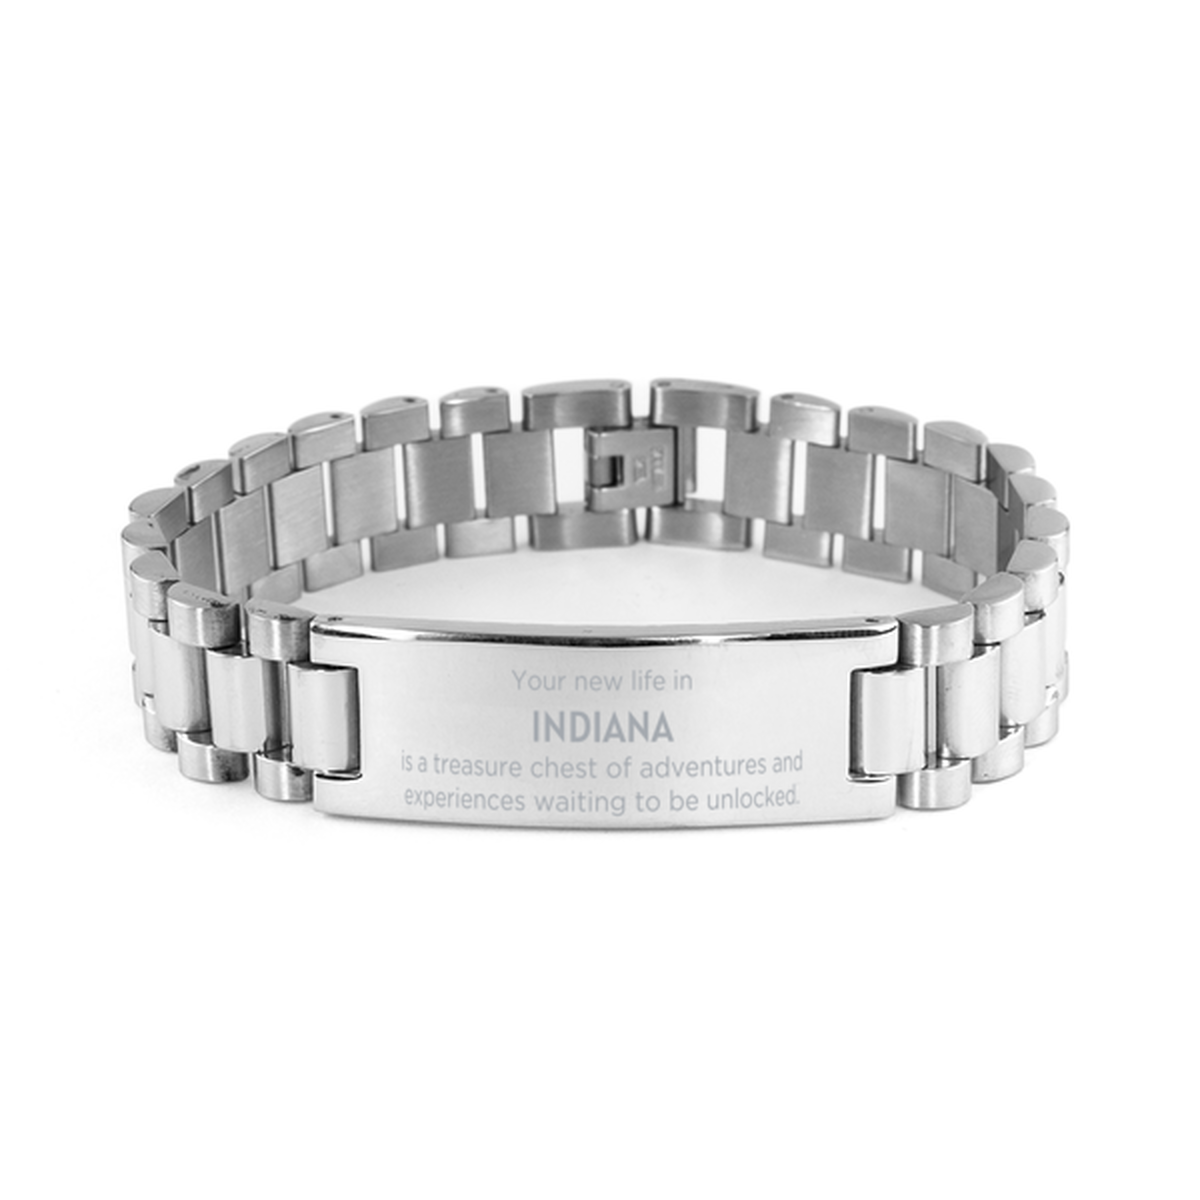 Moving to Indiana Gifts, Your new life in Indiana, Long Distance Indiana Christmas Ladder Stainless Steel Bracelet For Men, Women, Friends, Coworkers